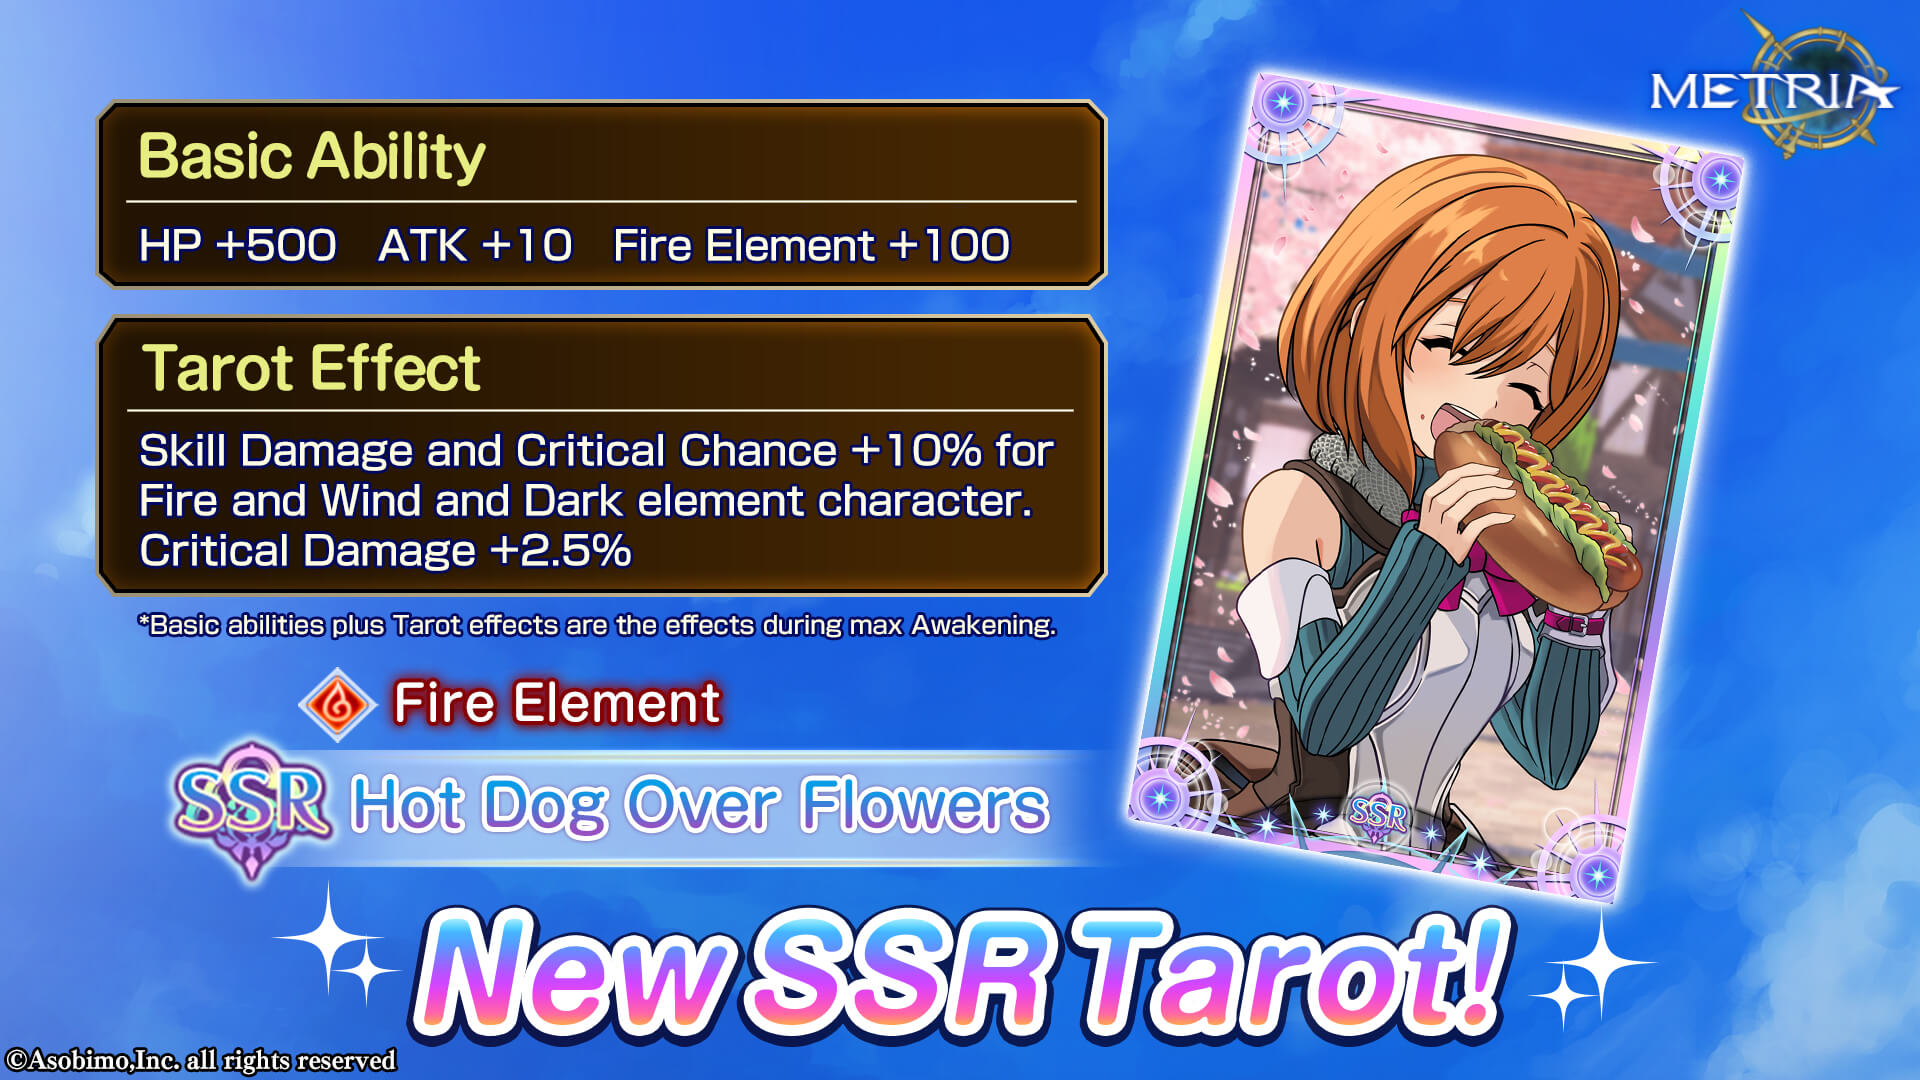 Fire Element New SSR Tarot: "Hot Dog Over Flowers" Available for Purchase!